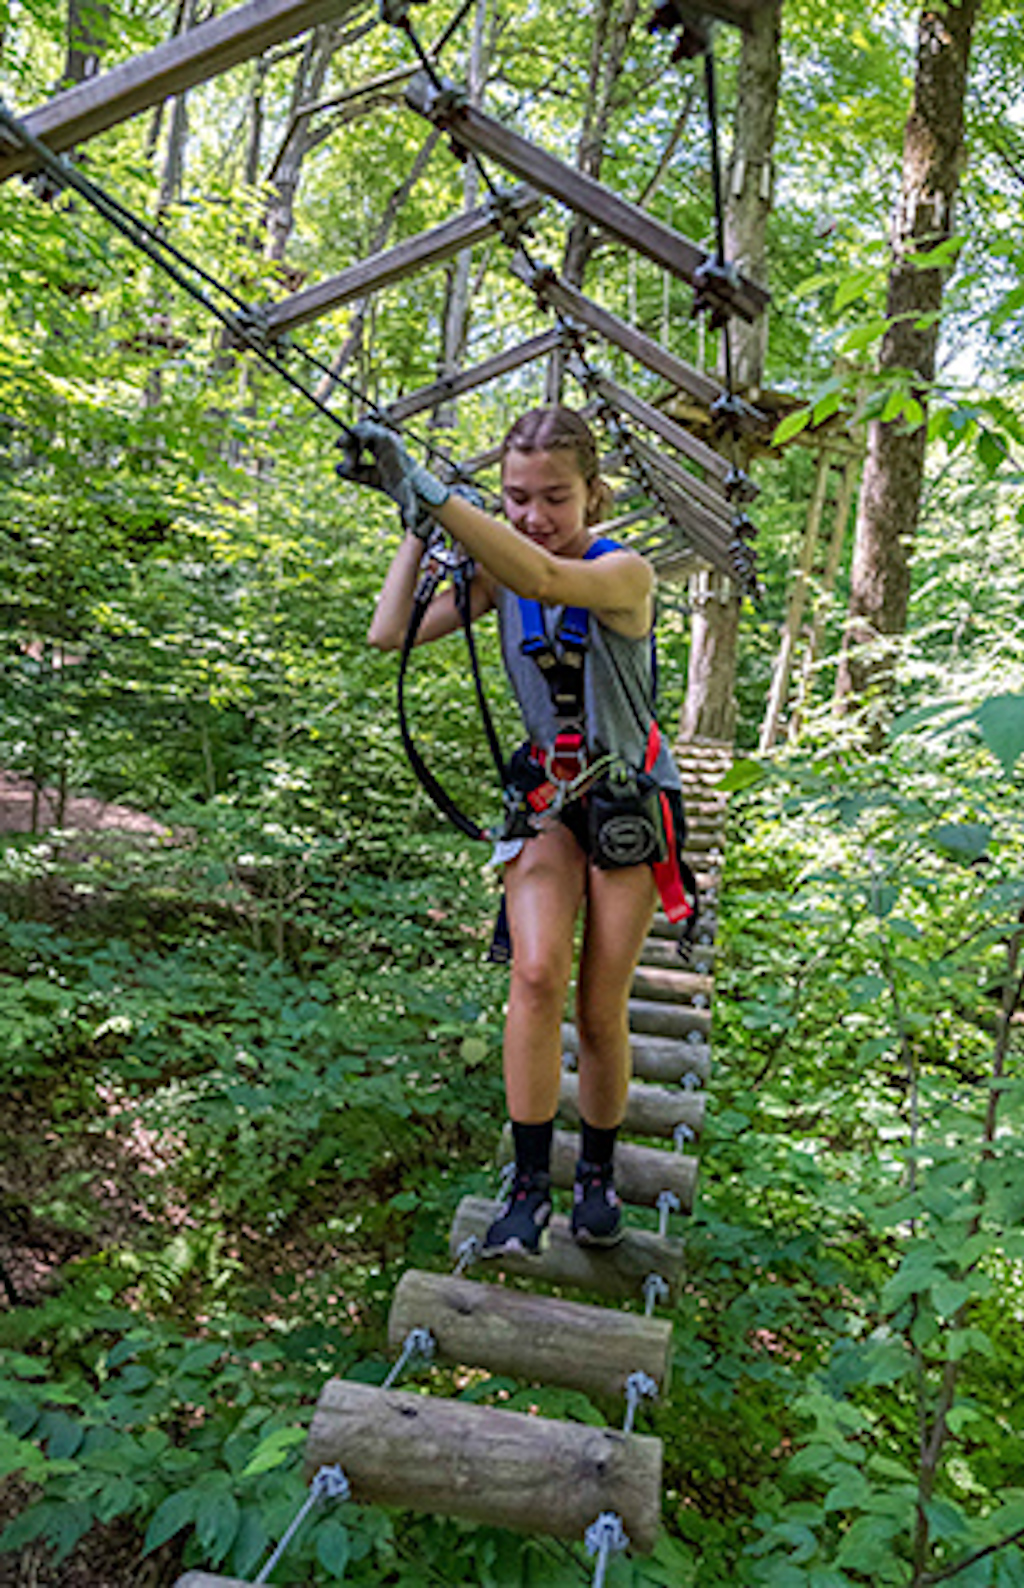 A young lady makes her way across a wooden bridge obstacle at Sky High Adventure Park.